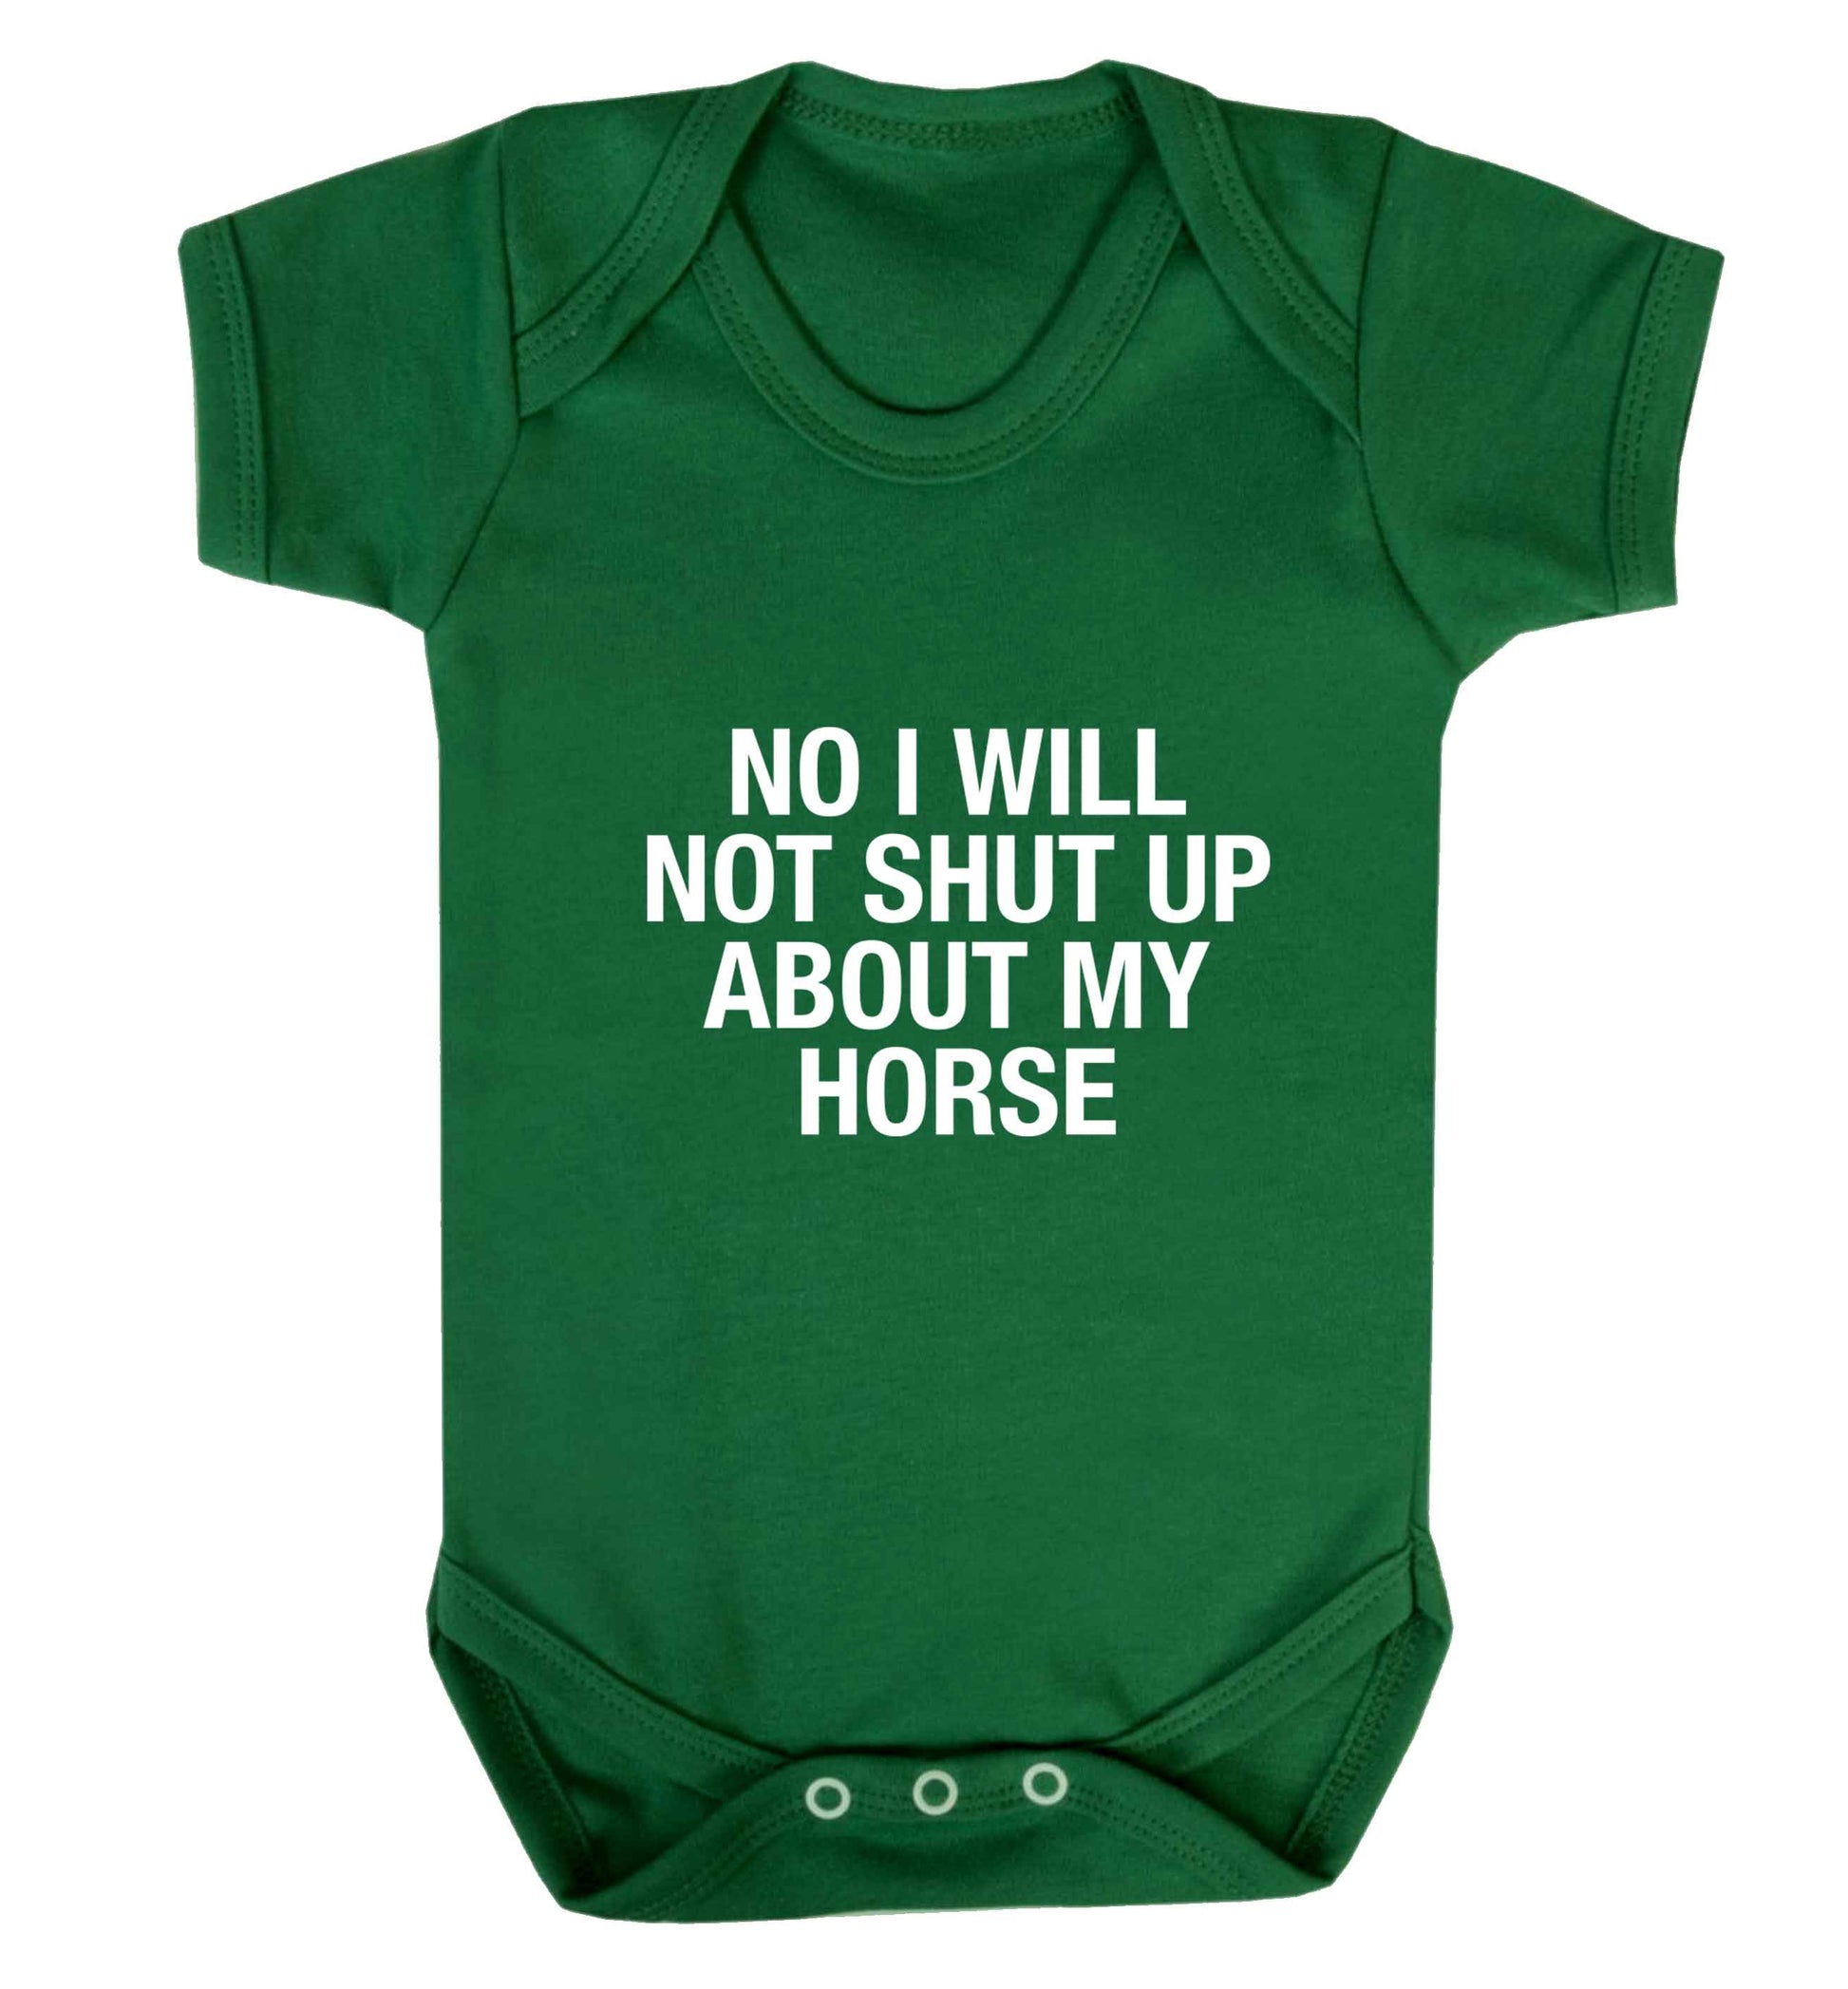 No I will not shut up talking about my horse baby vest green 18-24 months